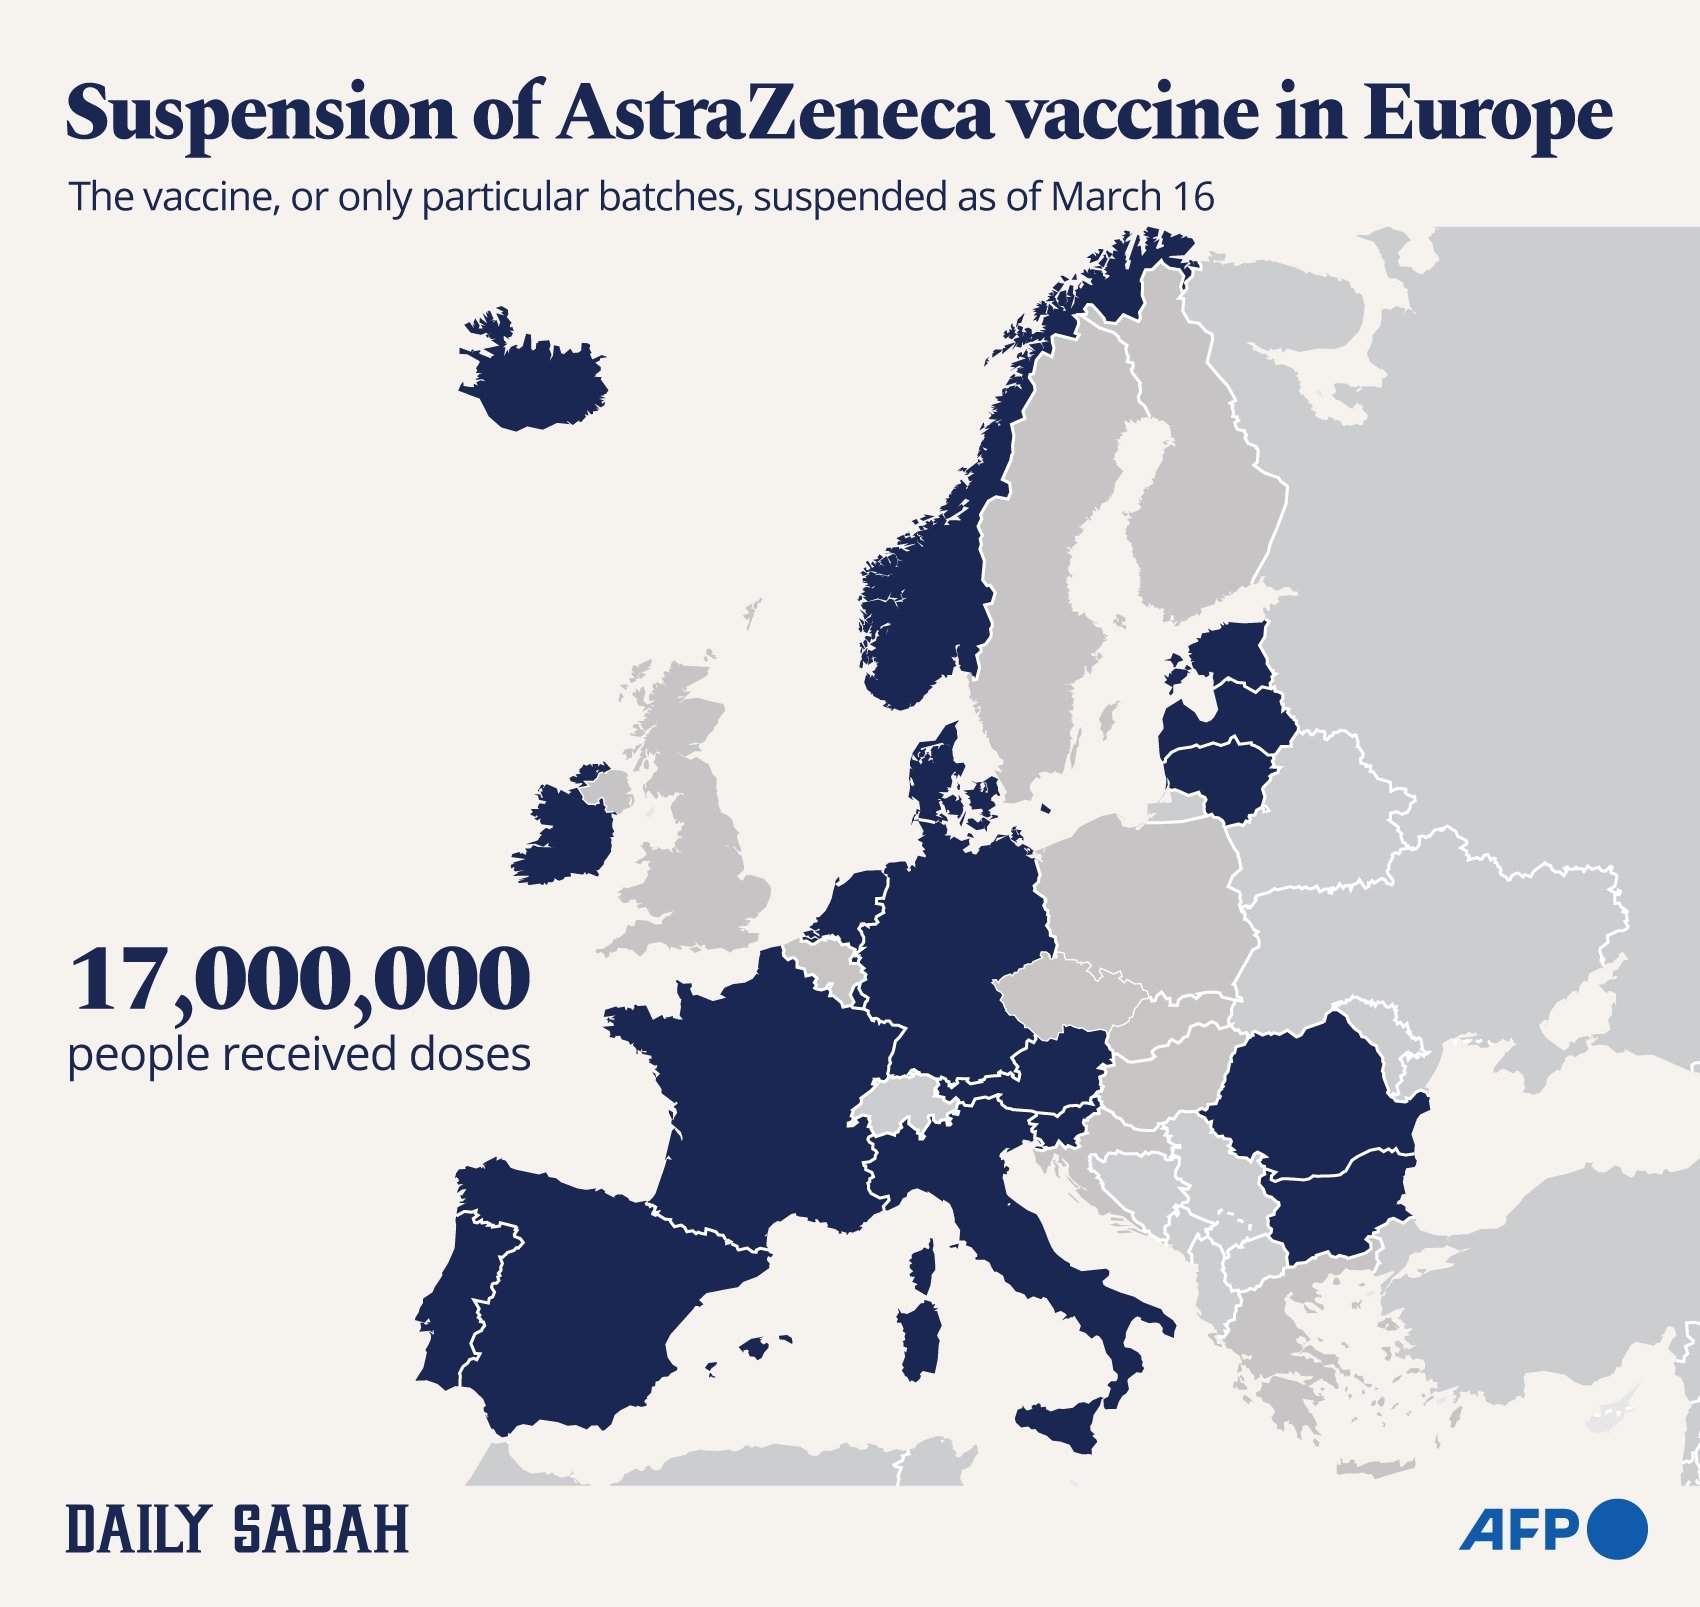 A number of countries in Europe have suspended the use of the AstraZeneca COVID-19 vaccine. (Infographic by Daily Sabah)